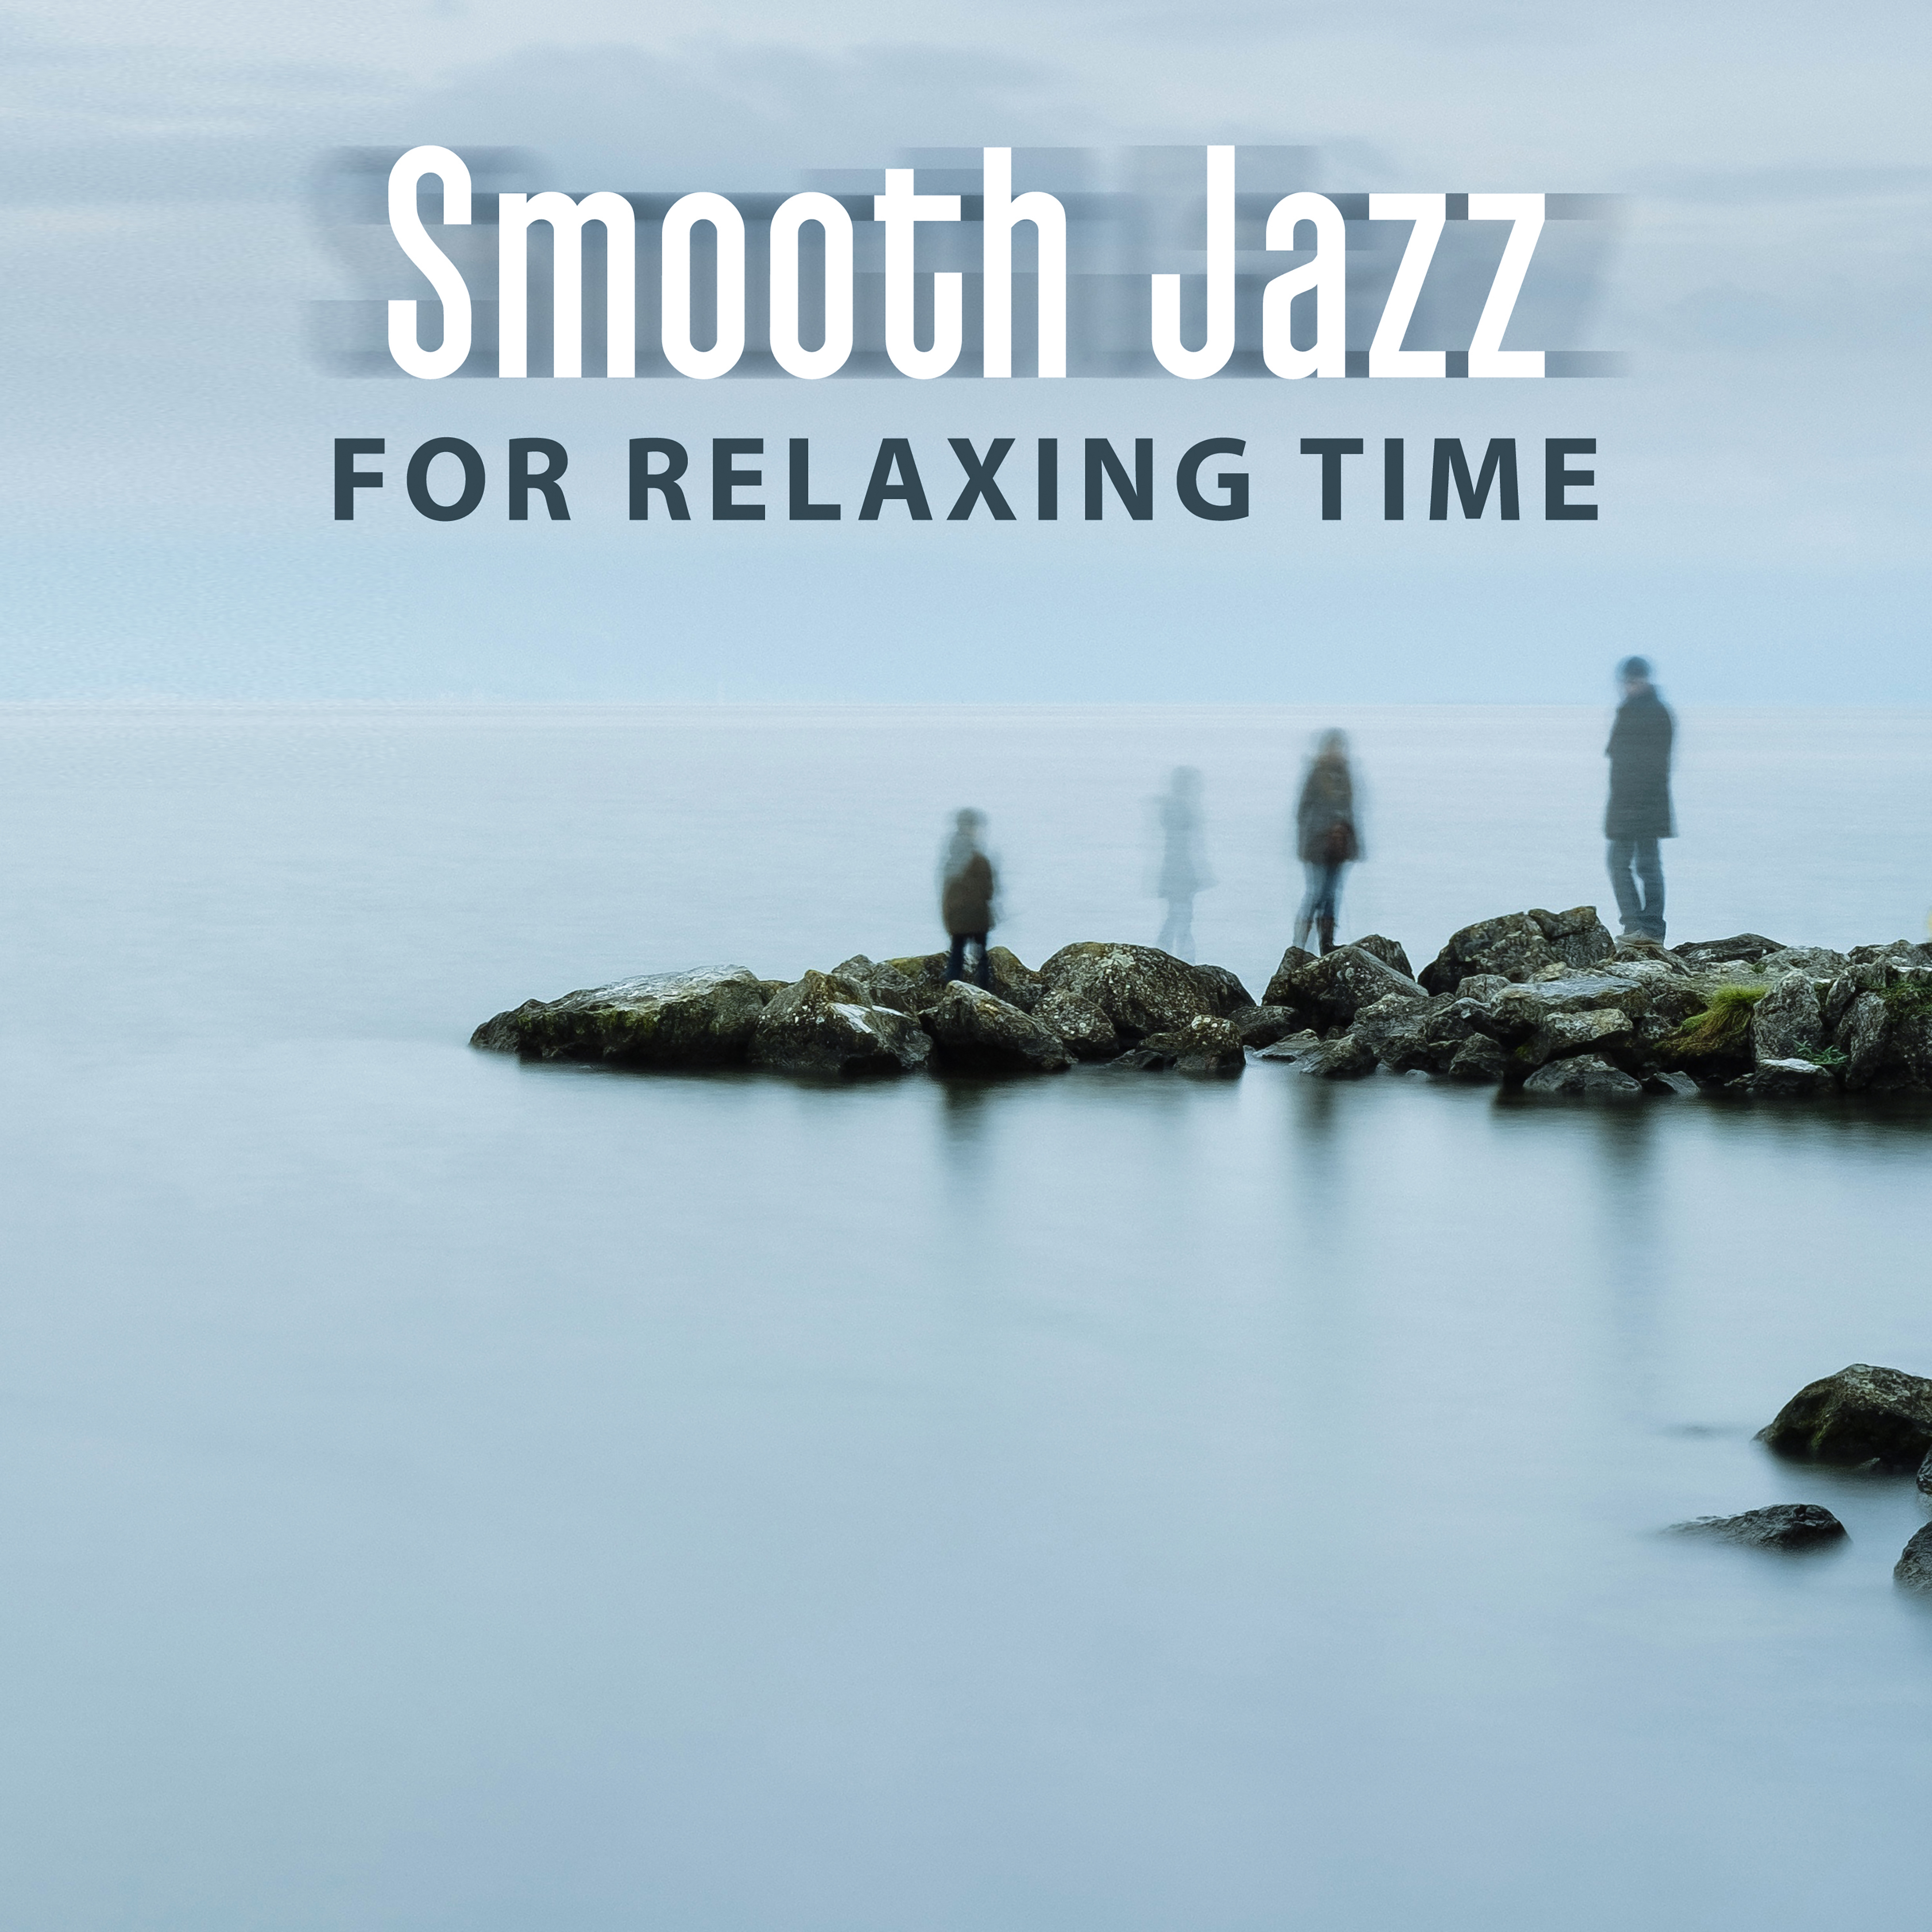 Smooth Jazz for Relaxing Time – Rest with Piano, Sounds to Relax, Mind Calmness, Stress Free, Easy Listening